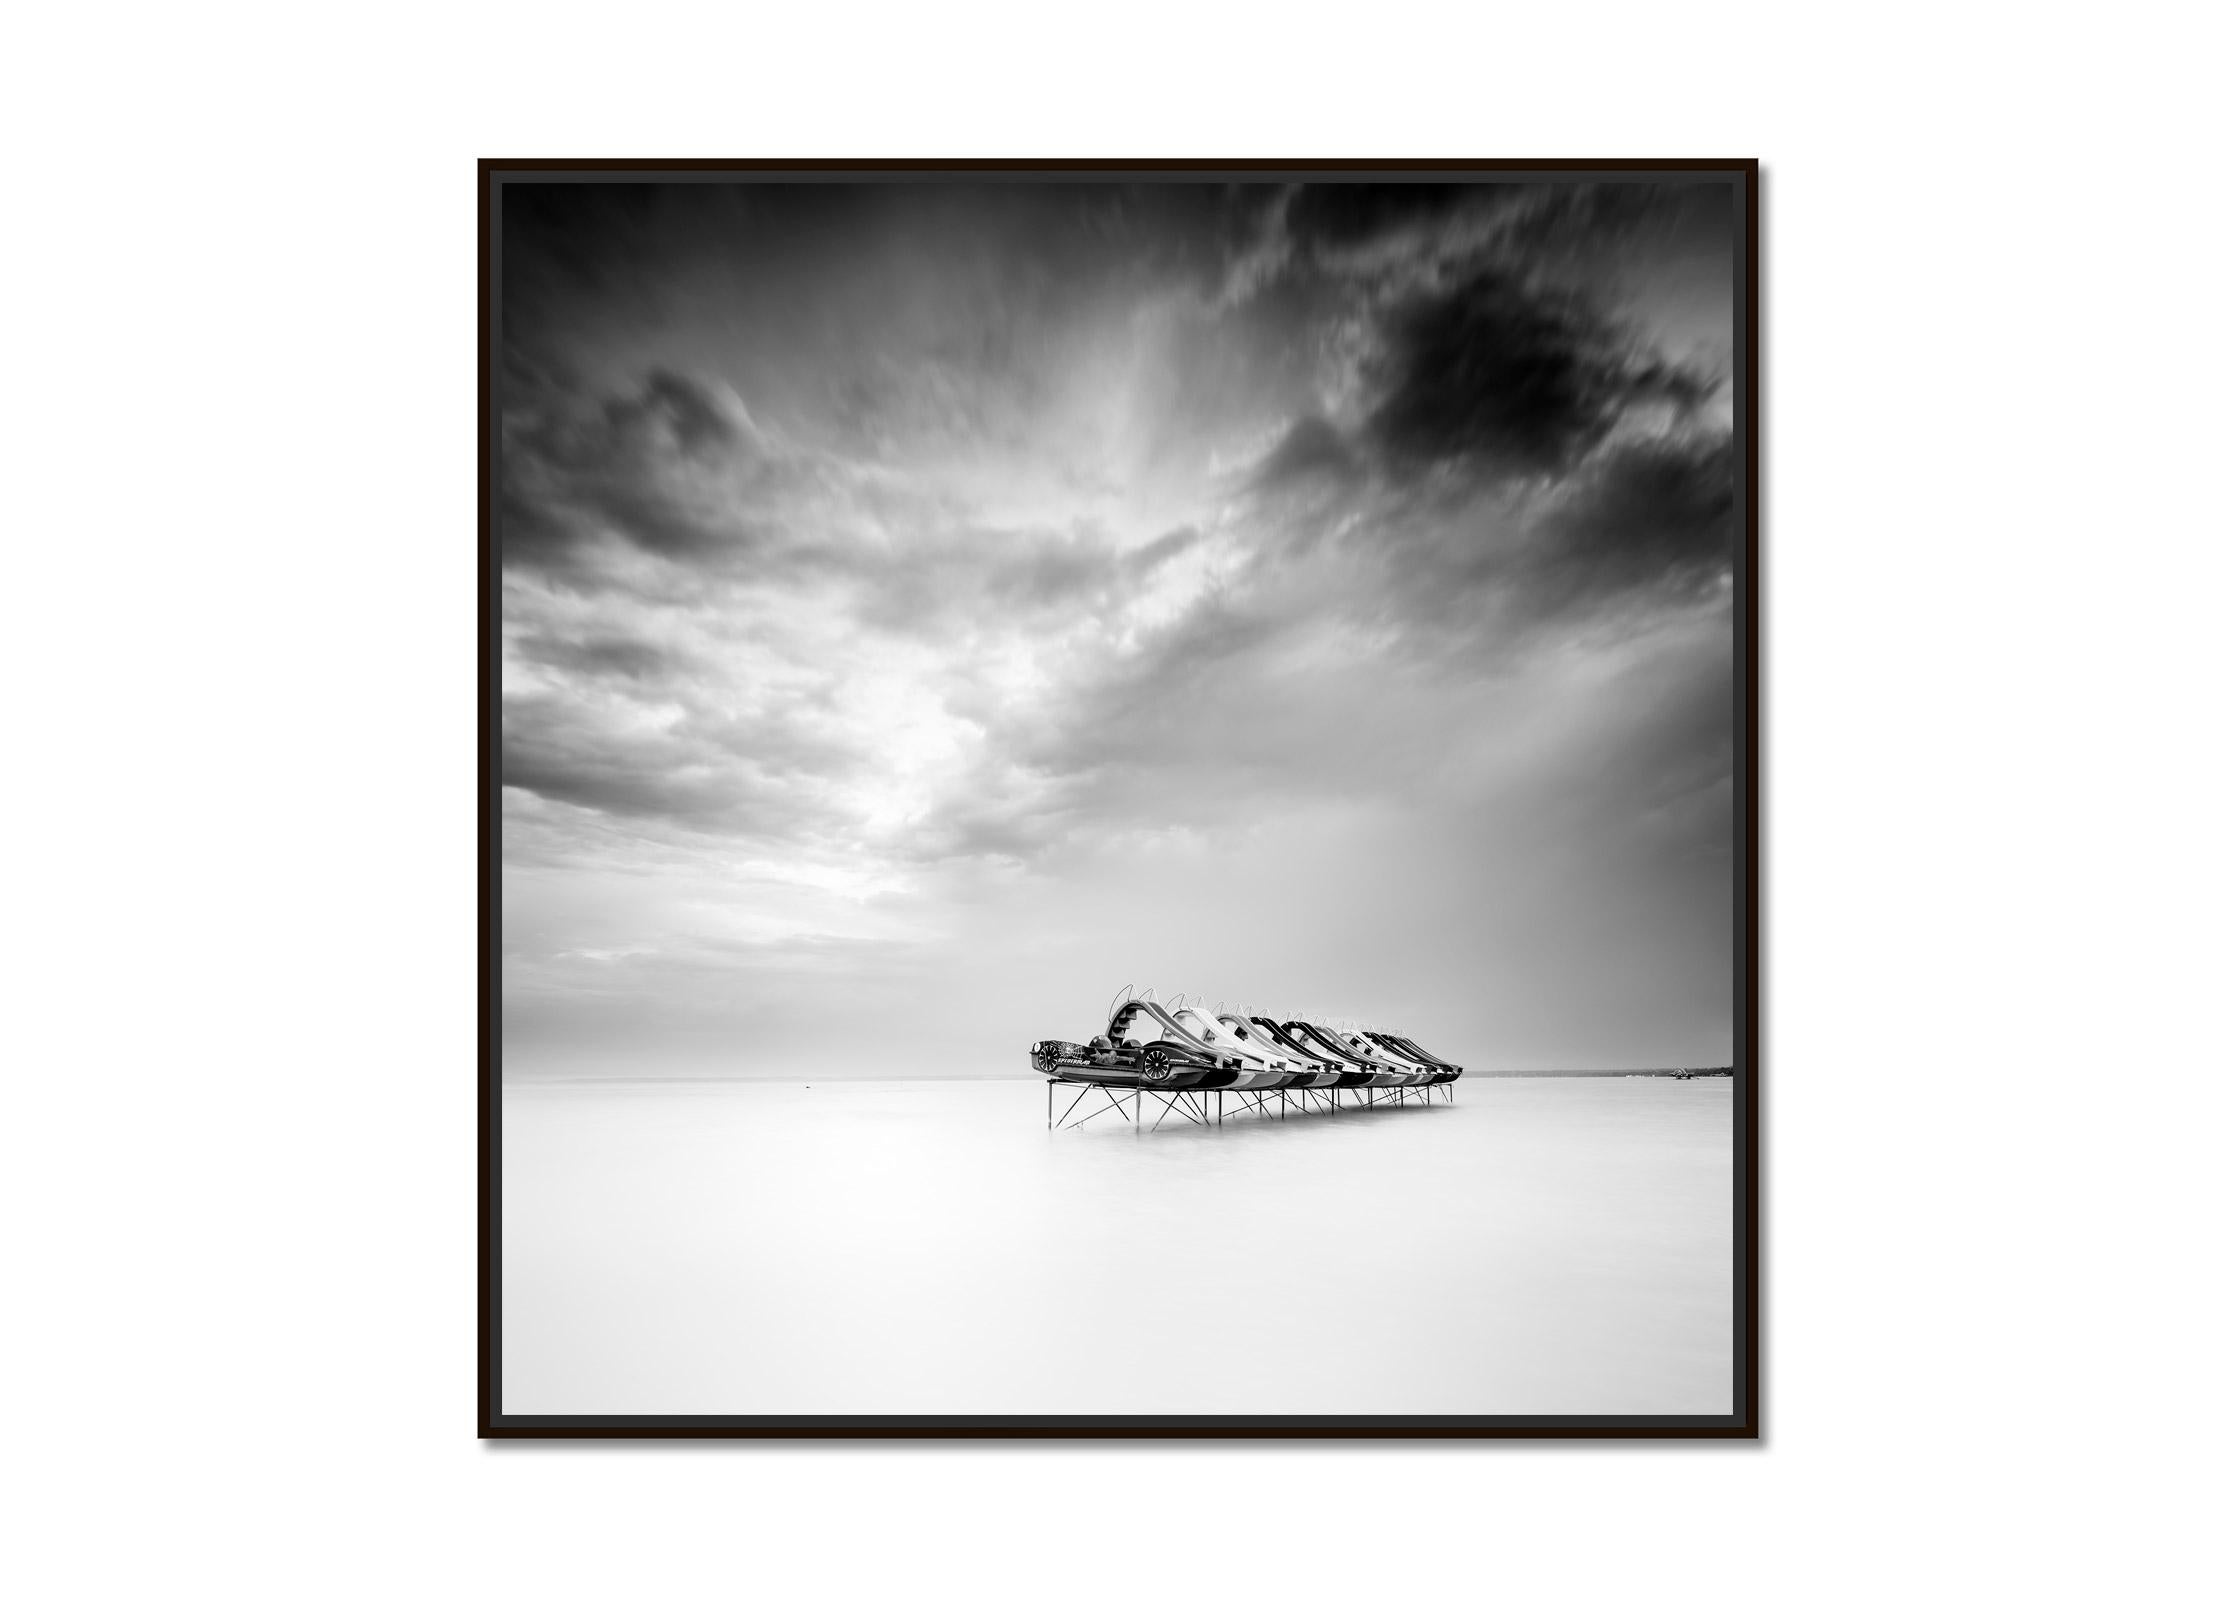 Pedal Boat, storm, Balaton, Hungary, black and white lakescape art photography - Photograph by Gerald Berghammer